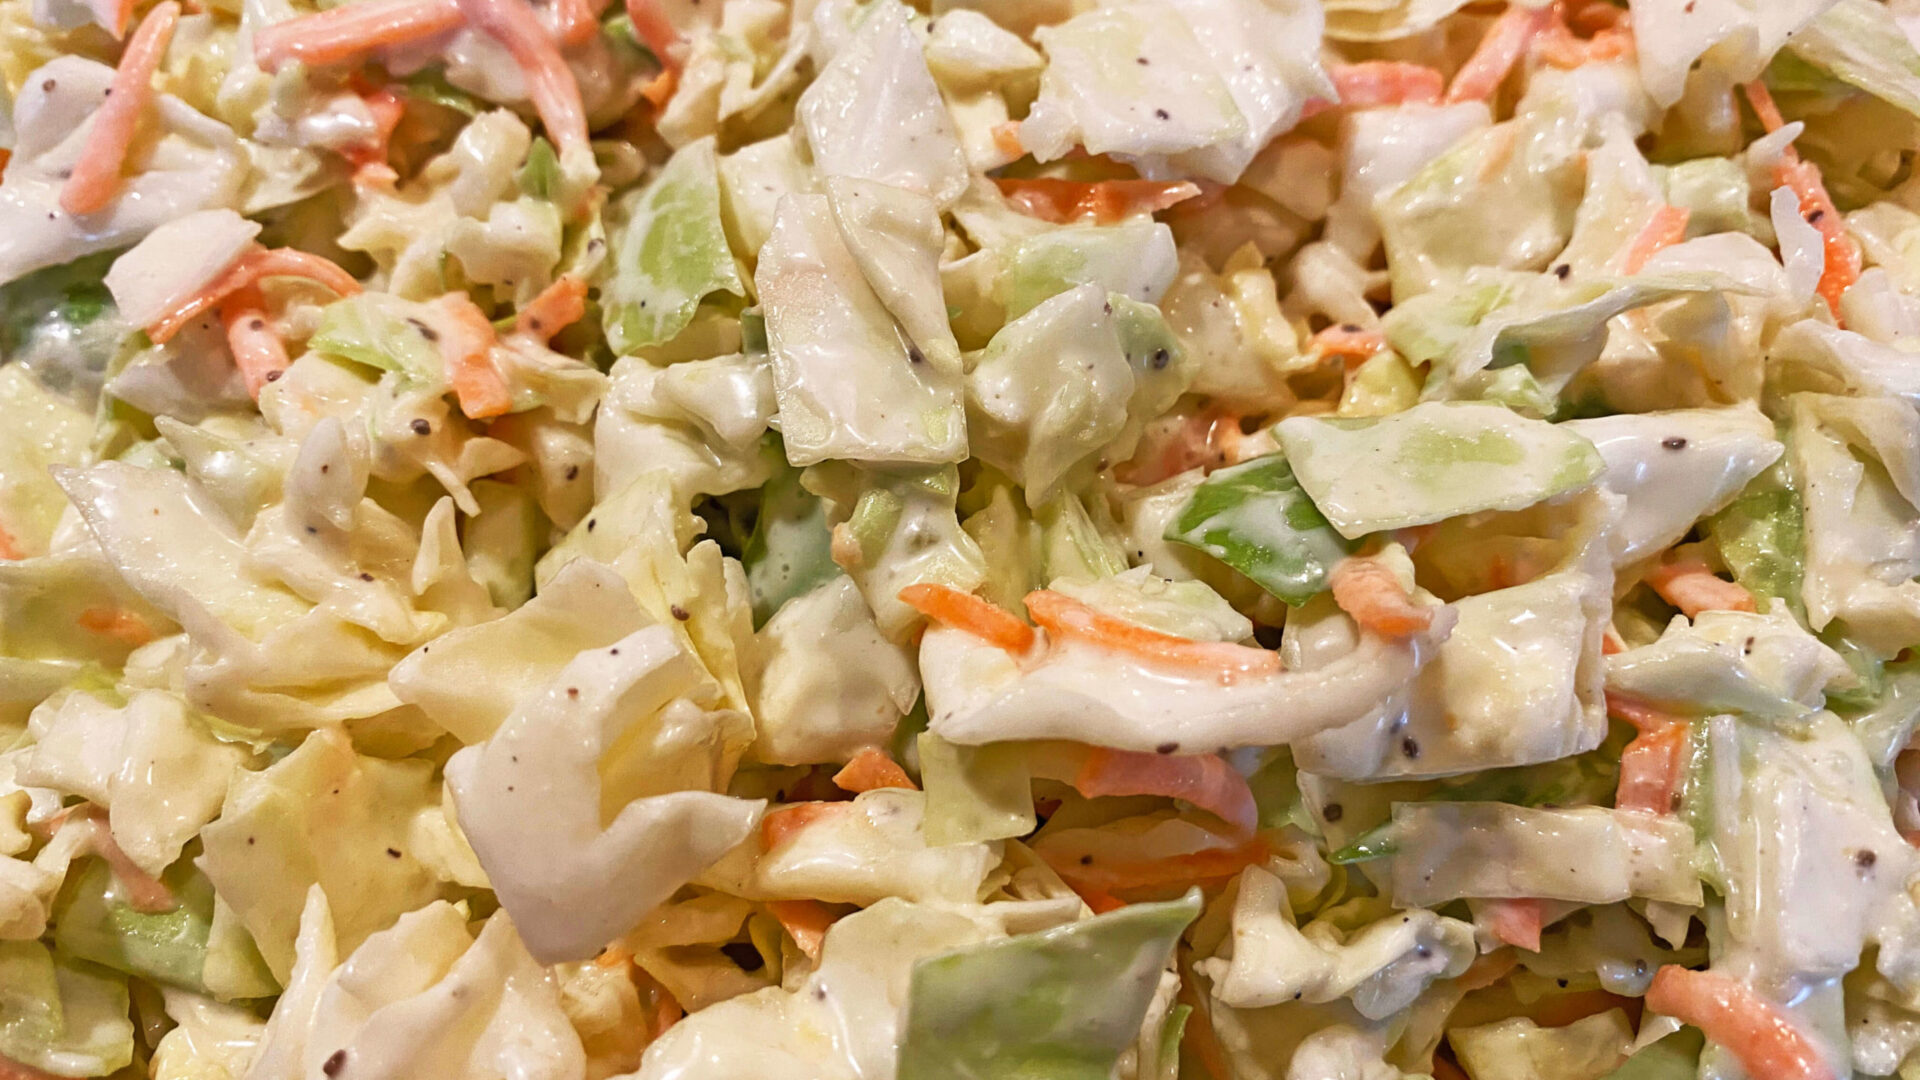 Cabbage salad with green cabbage, orange carrots, and spices in a white creamy sauce